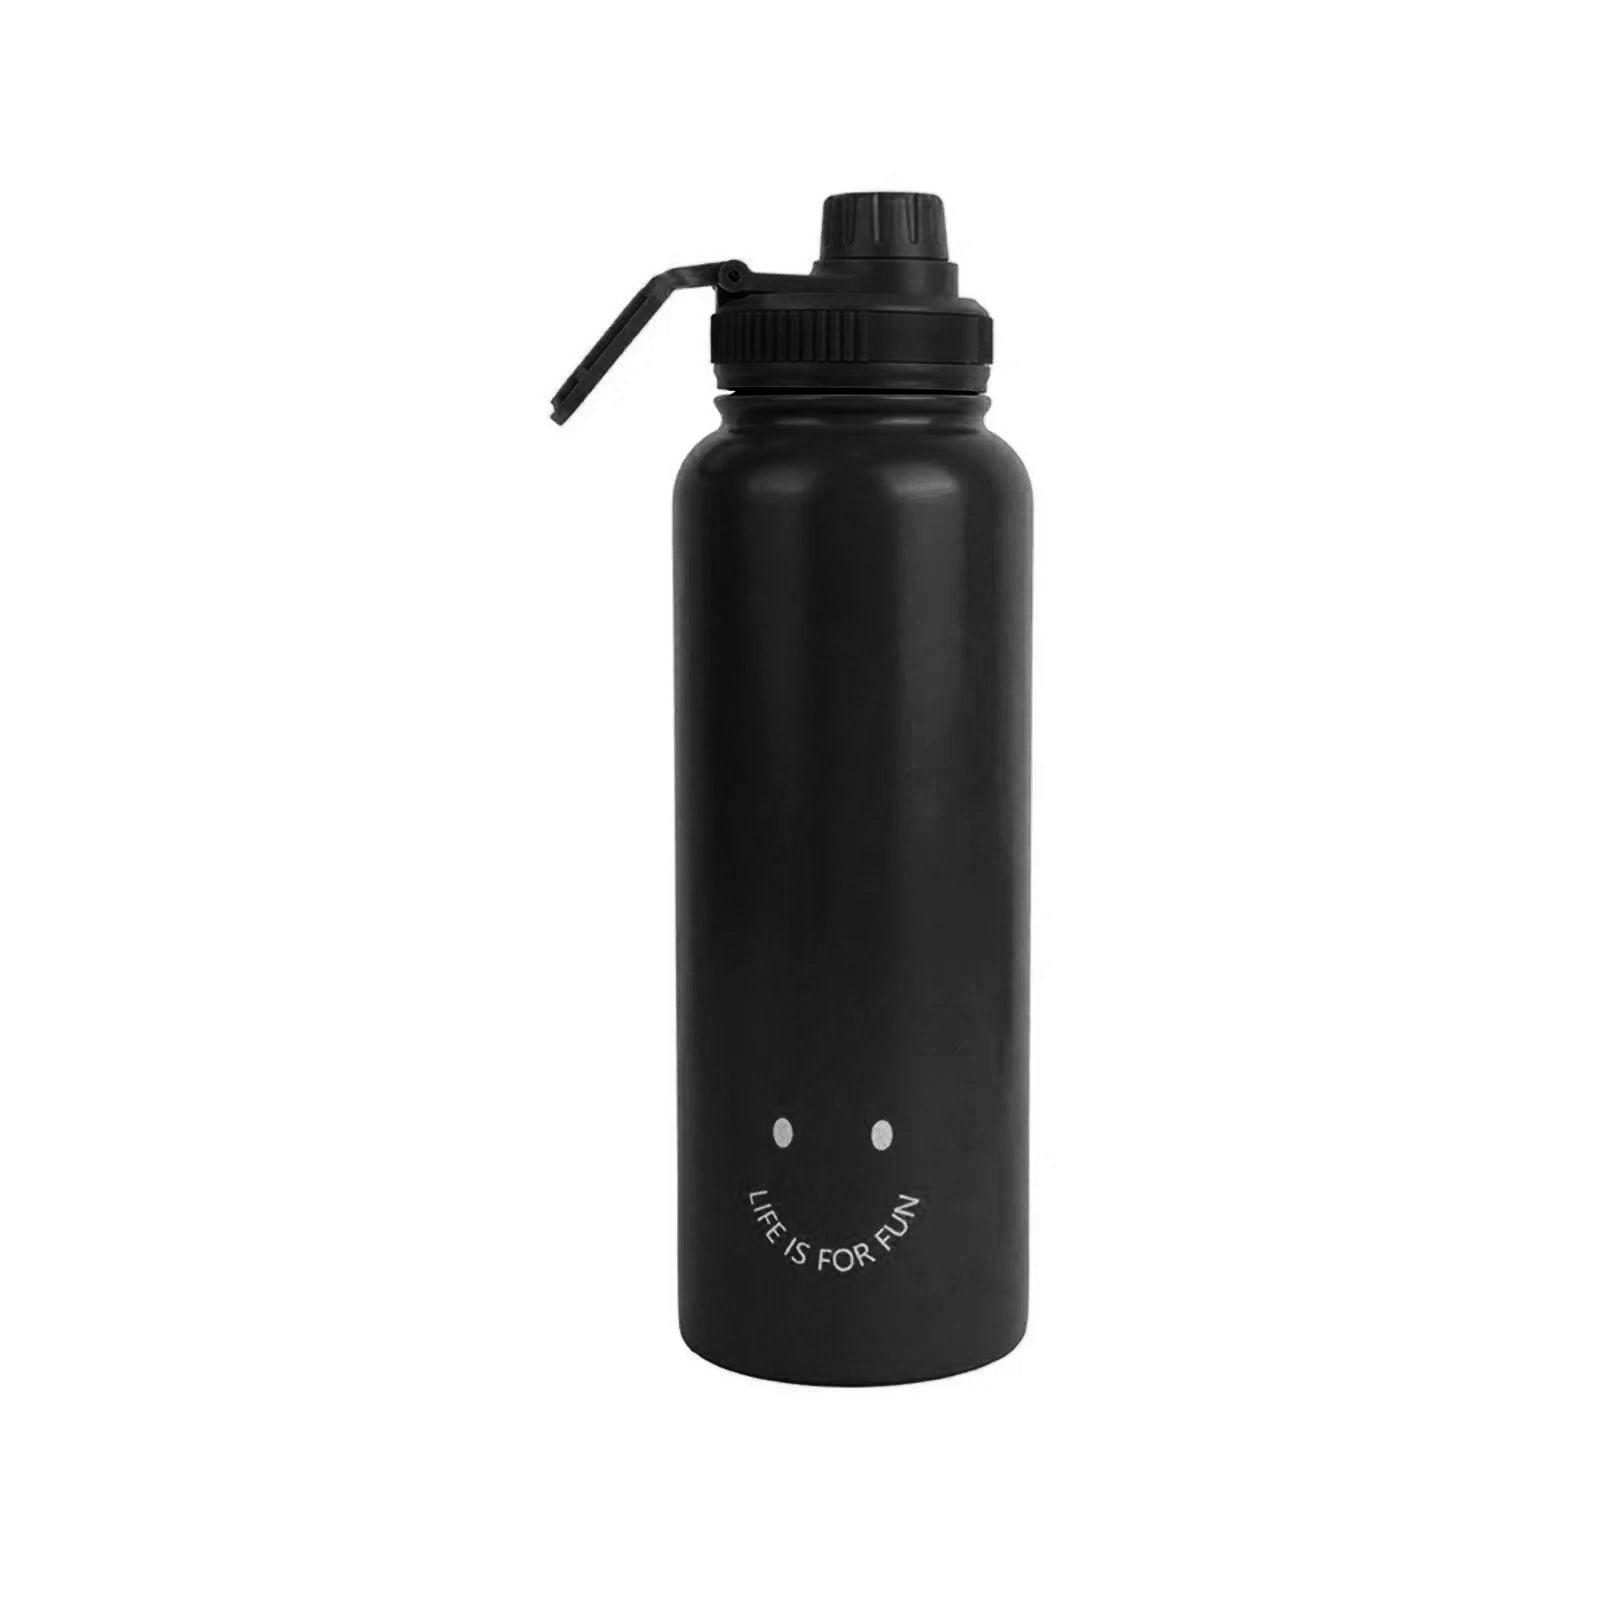 MINISO SOLID COLOR HANDHELD STAINLESS STEEL WATER BOTTLE 1.4L(BLACK) 2015239614100 STEEL CUP